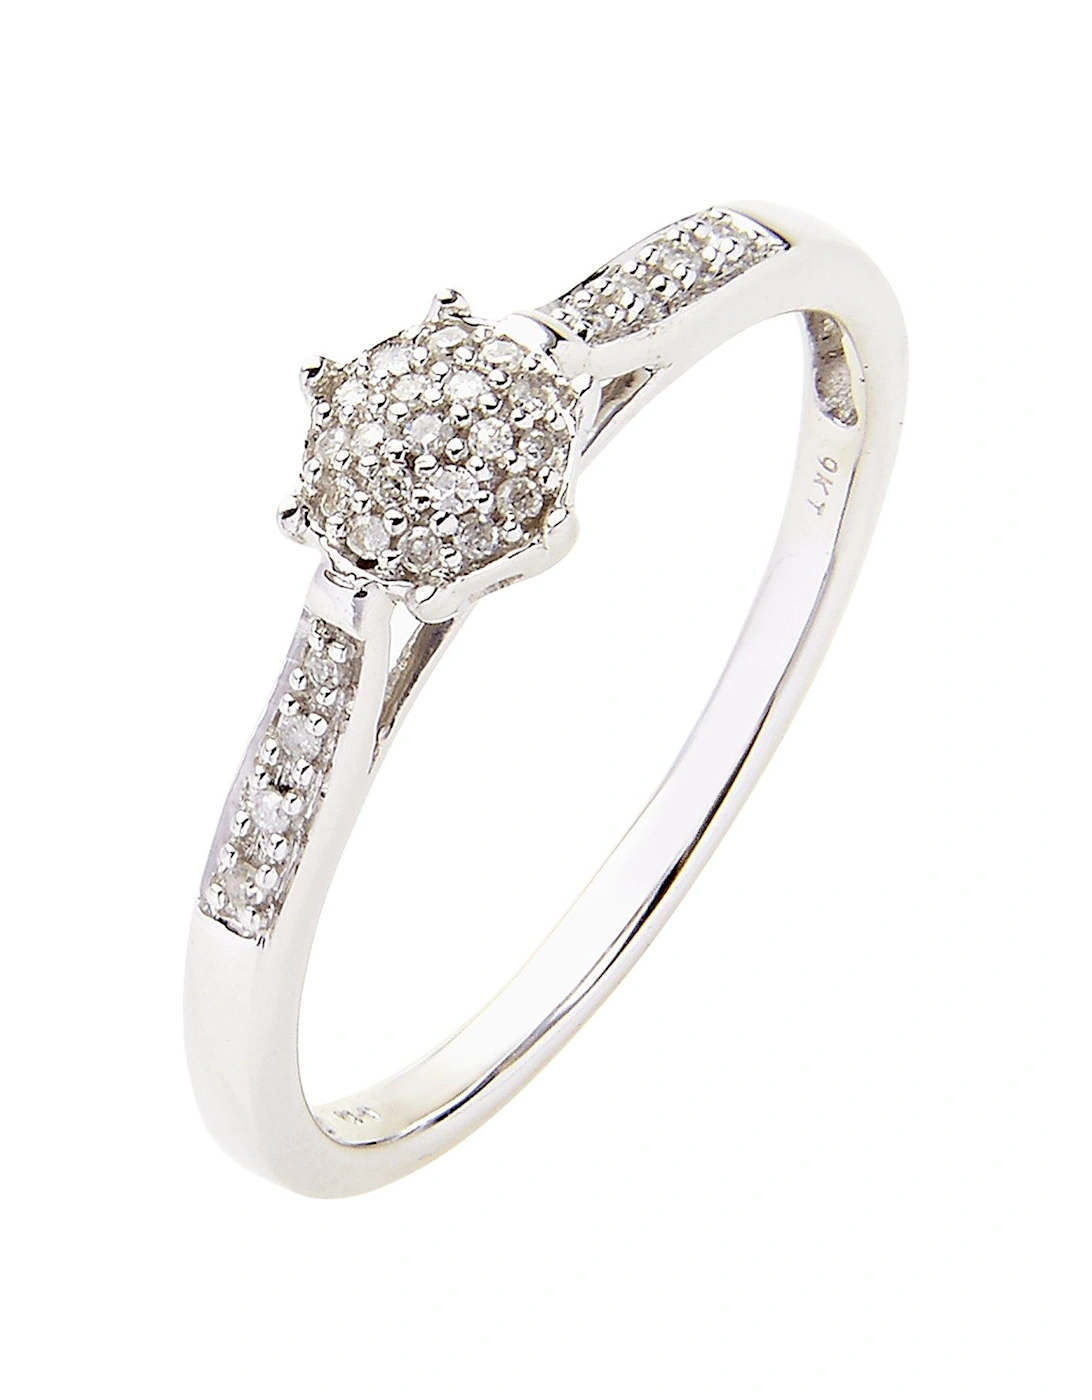 9 Carat White Gold 10 Point Diamond Cluster Ring With Diamond Set Shoulders, 2 of 1